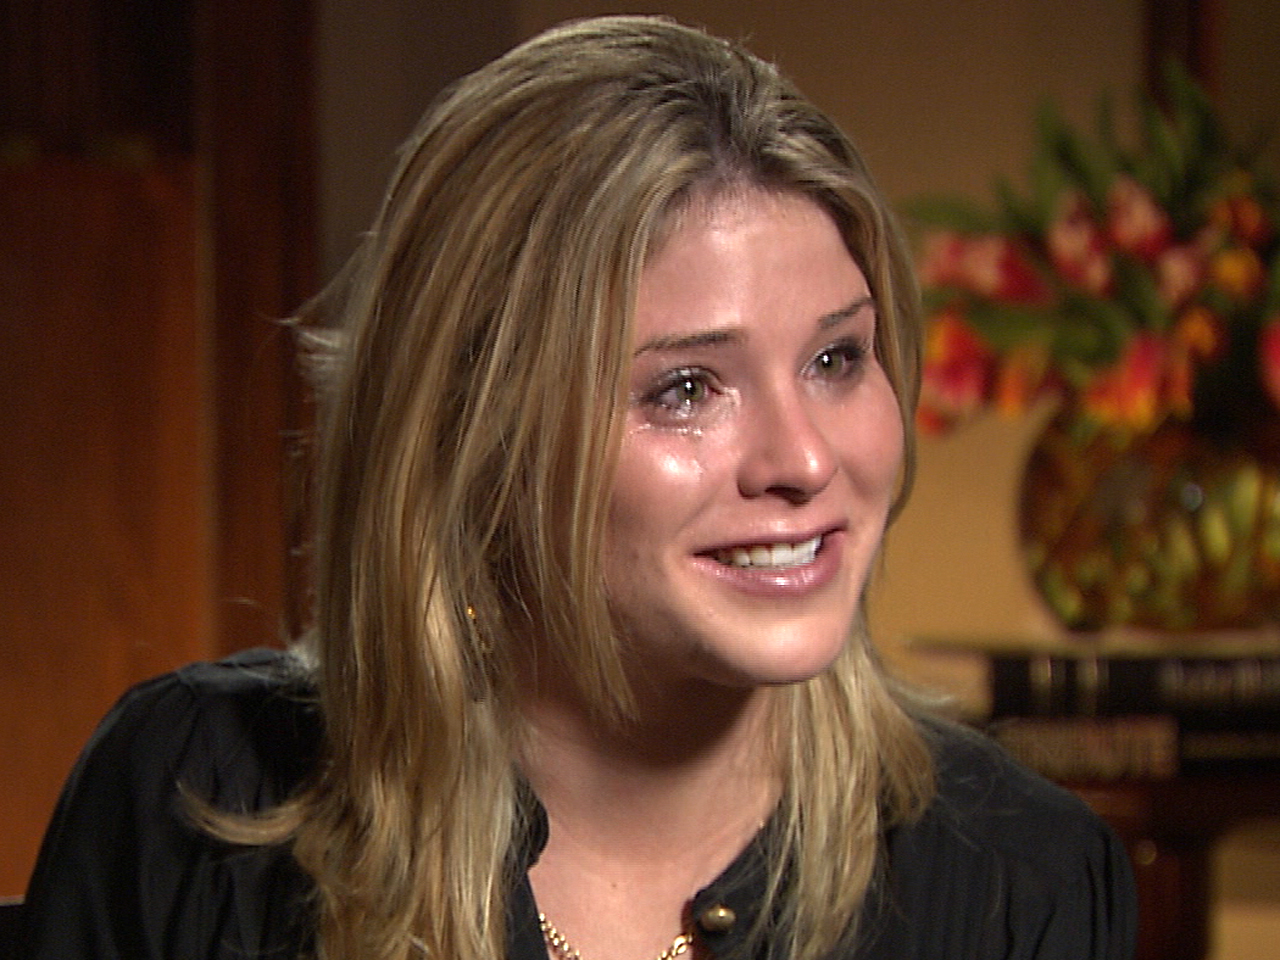 The TODAY crier: Jenna Bush Hager gets emotional.